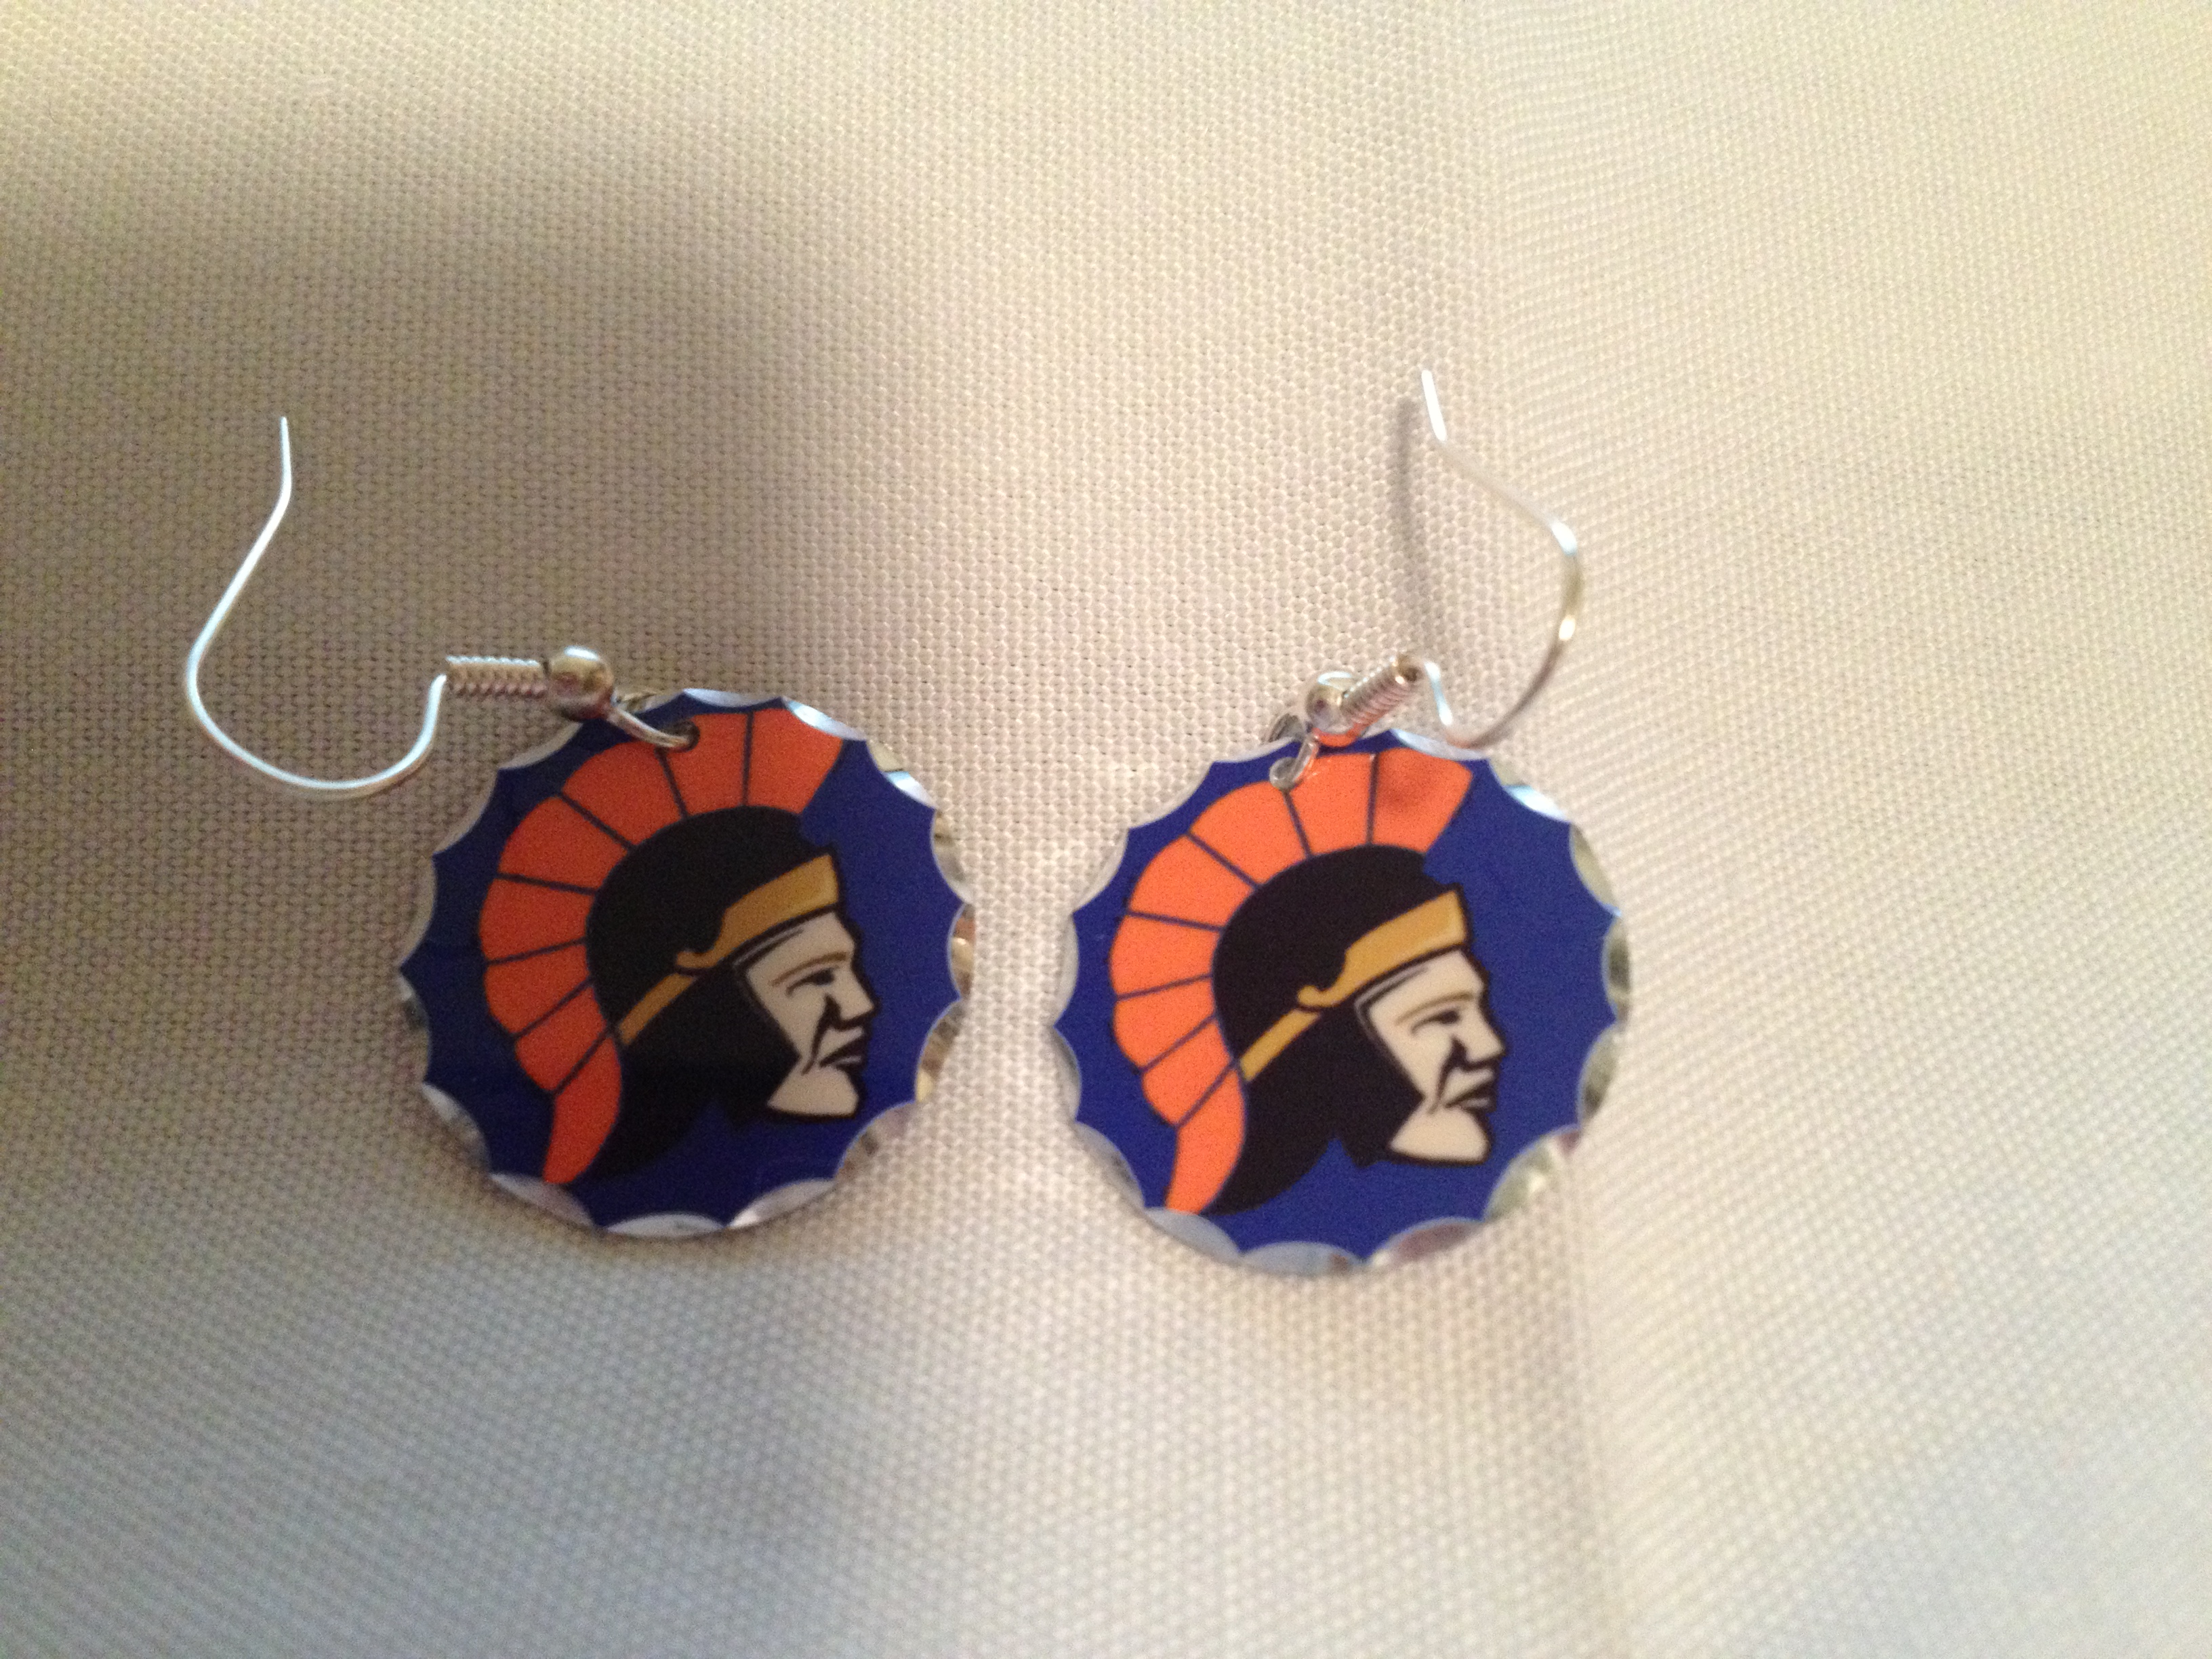 Ear Rings made with sublimation printing